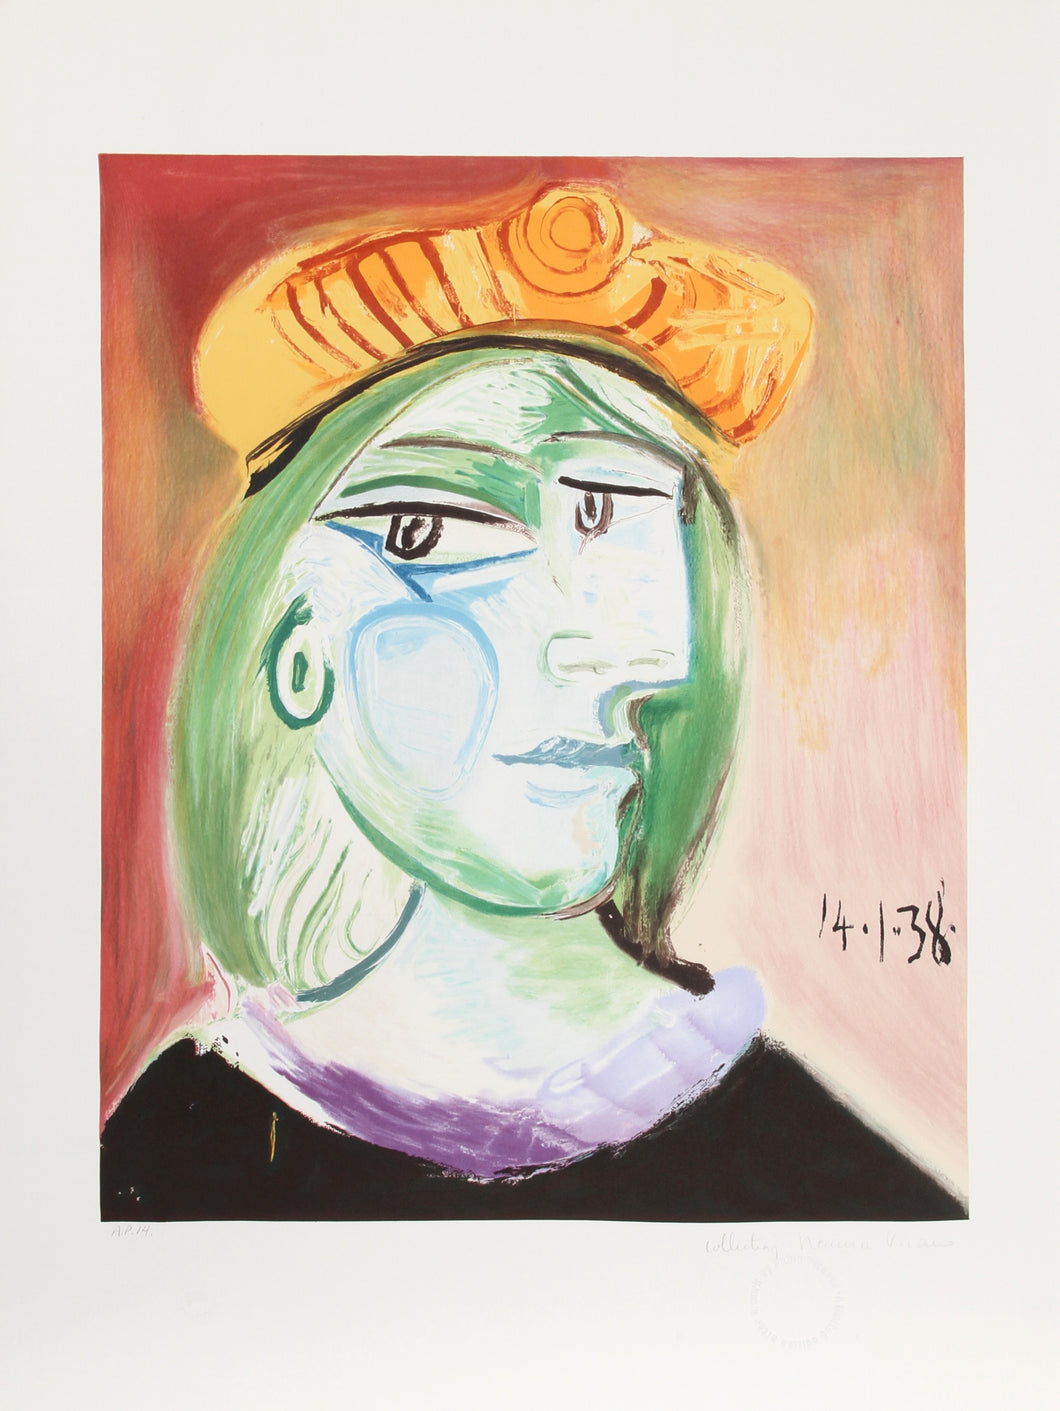 Pablo Picasso, Marie Therese Walter, 25-4, Lithograph on Arches Paper